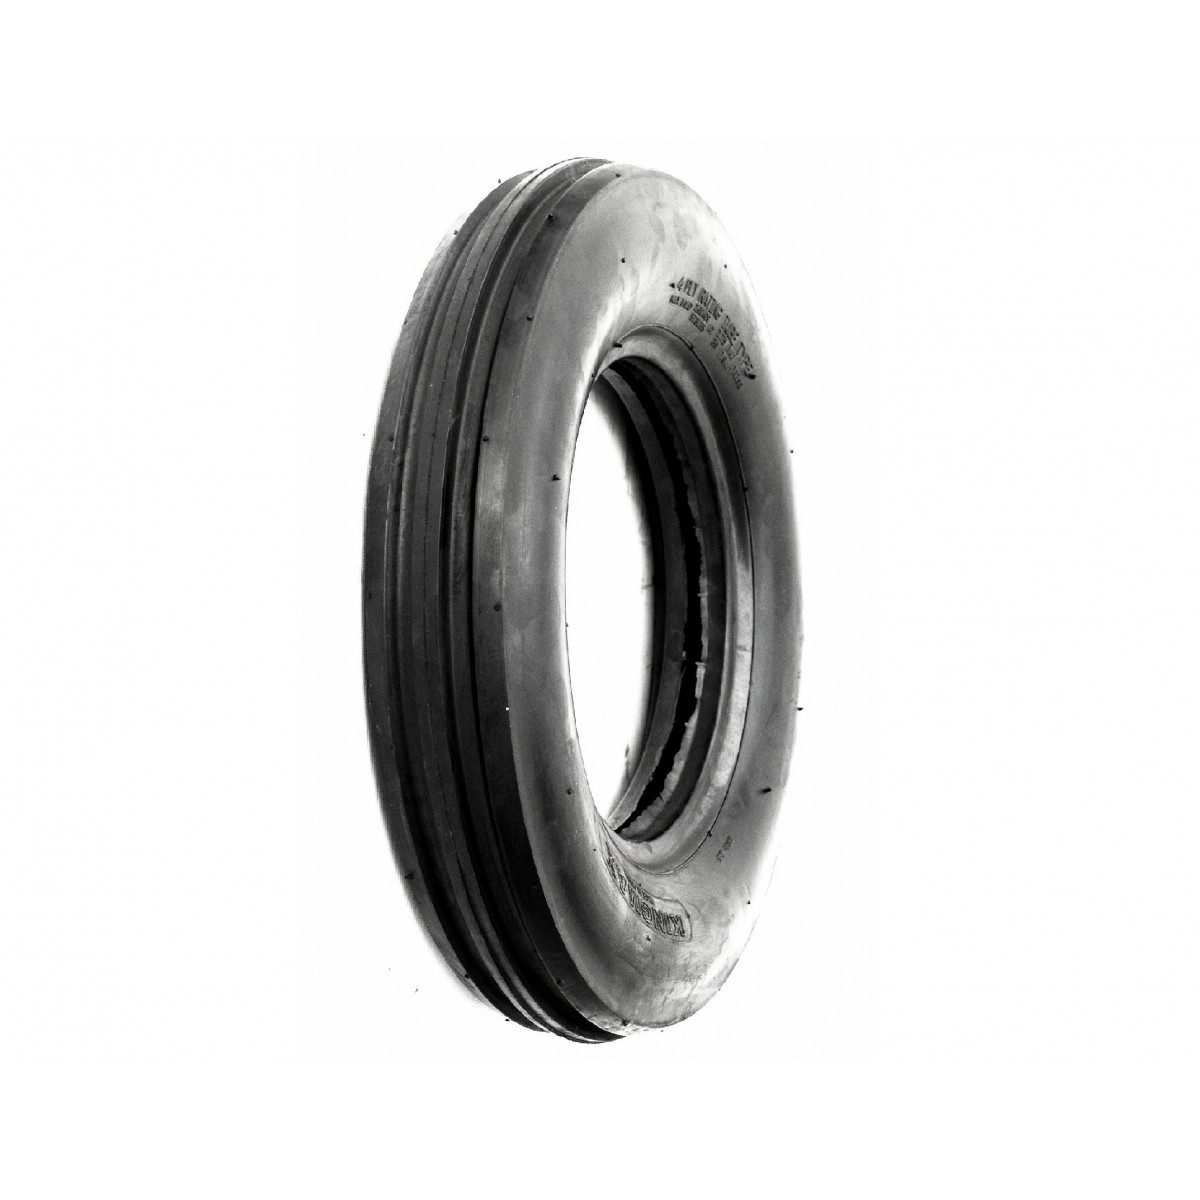 Agricultural tire 4.50-10 4PR 4.5-10 4.5x10 SMOOTH